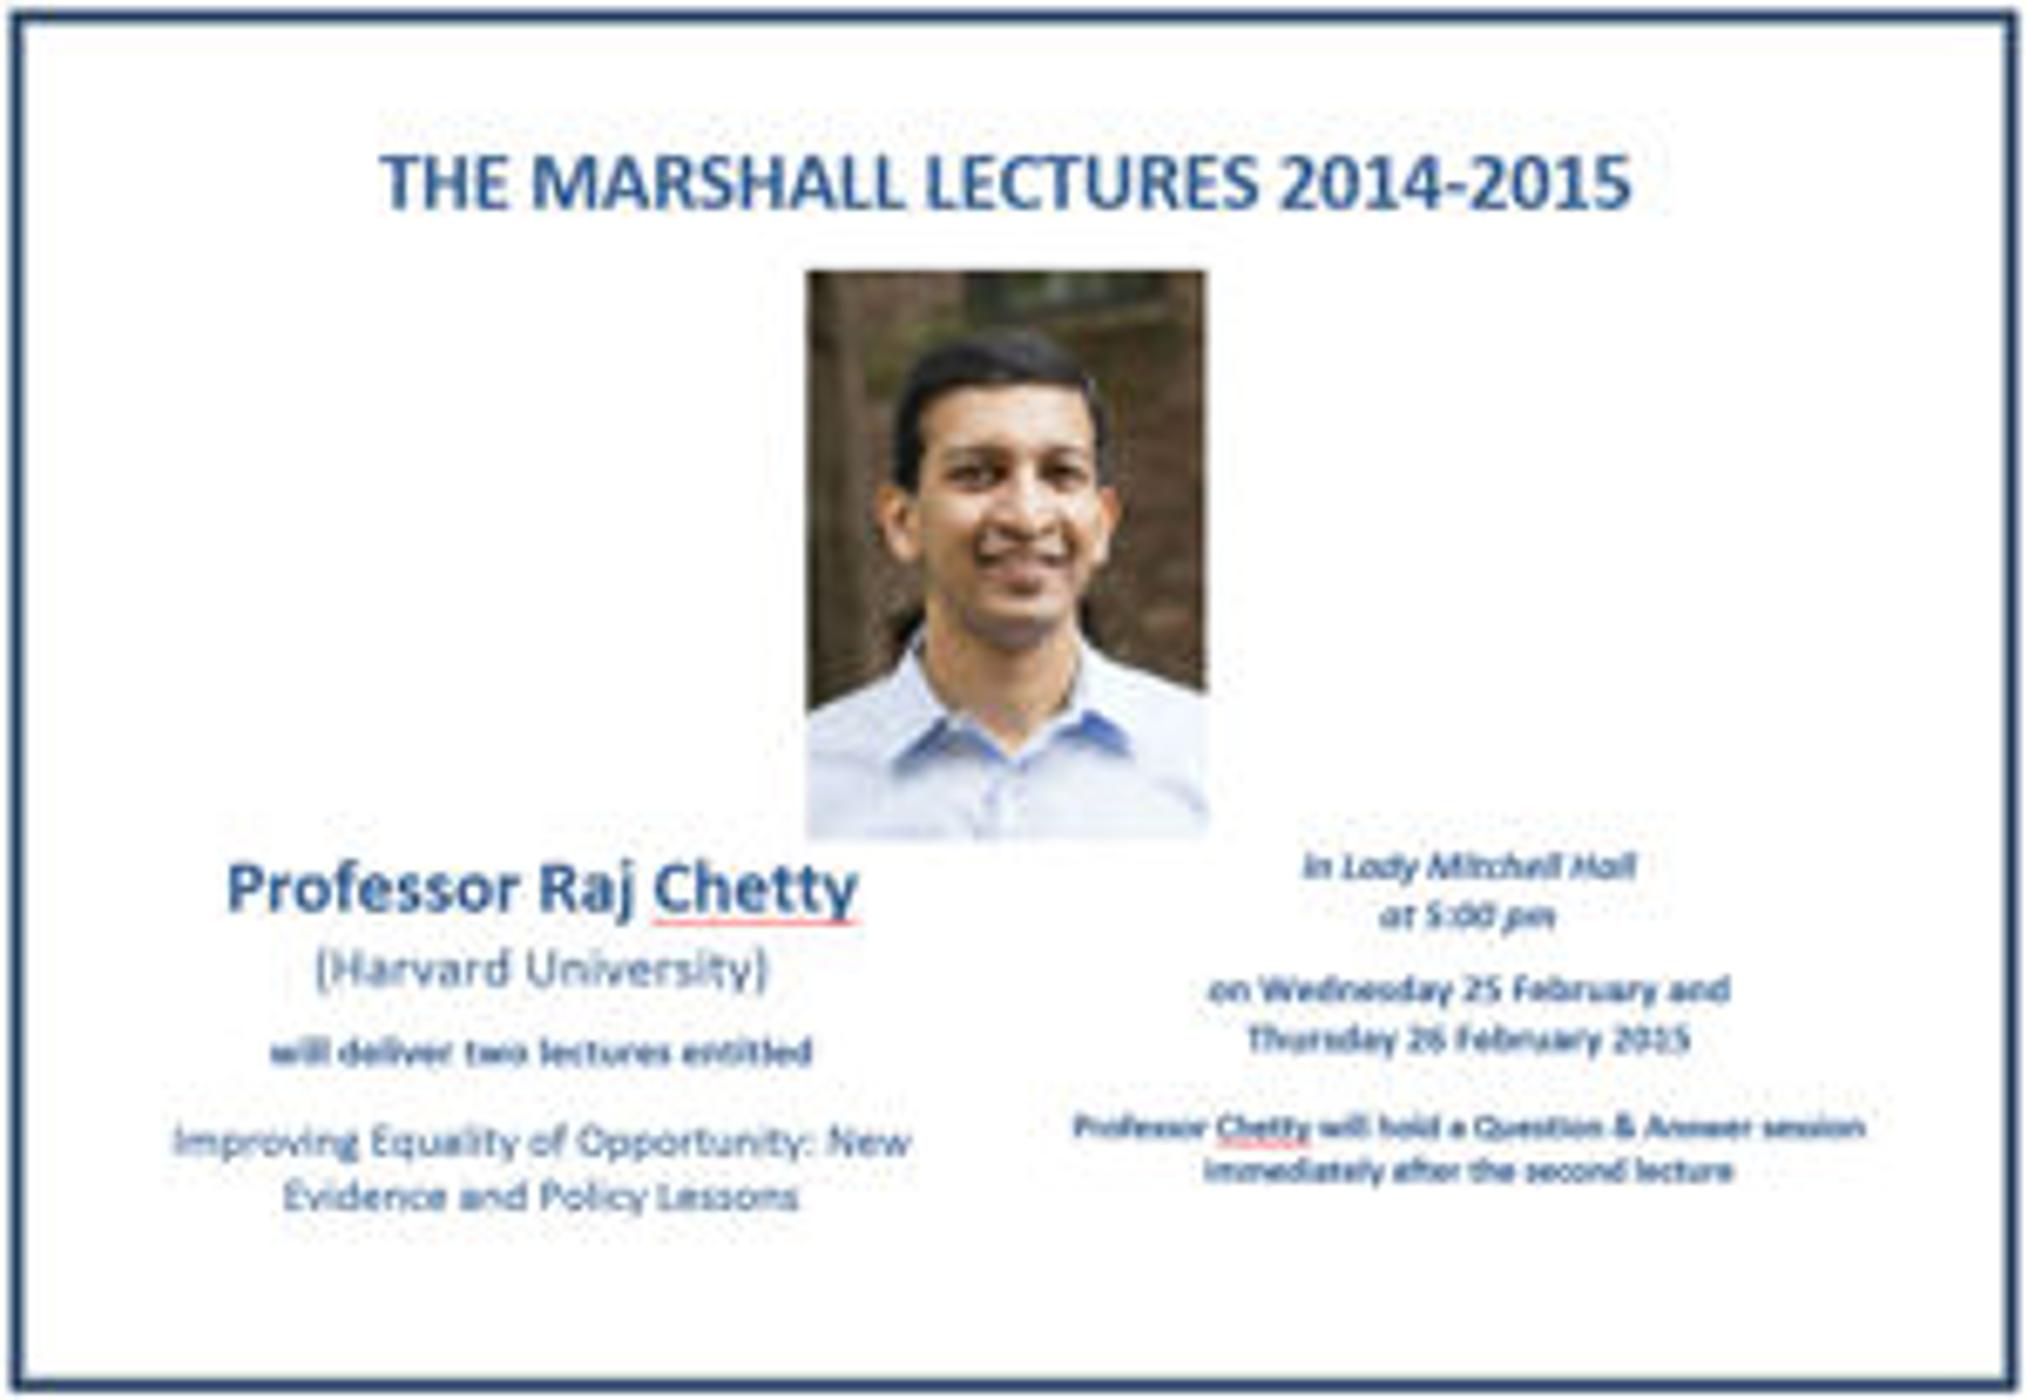 Marshall Lecture 2014-2015 Professor Raj Chetty - Improving Equality of Opportunity: New Evidence and Policy Lessons - Lecture 2